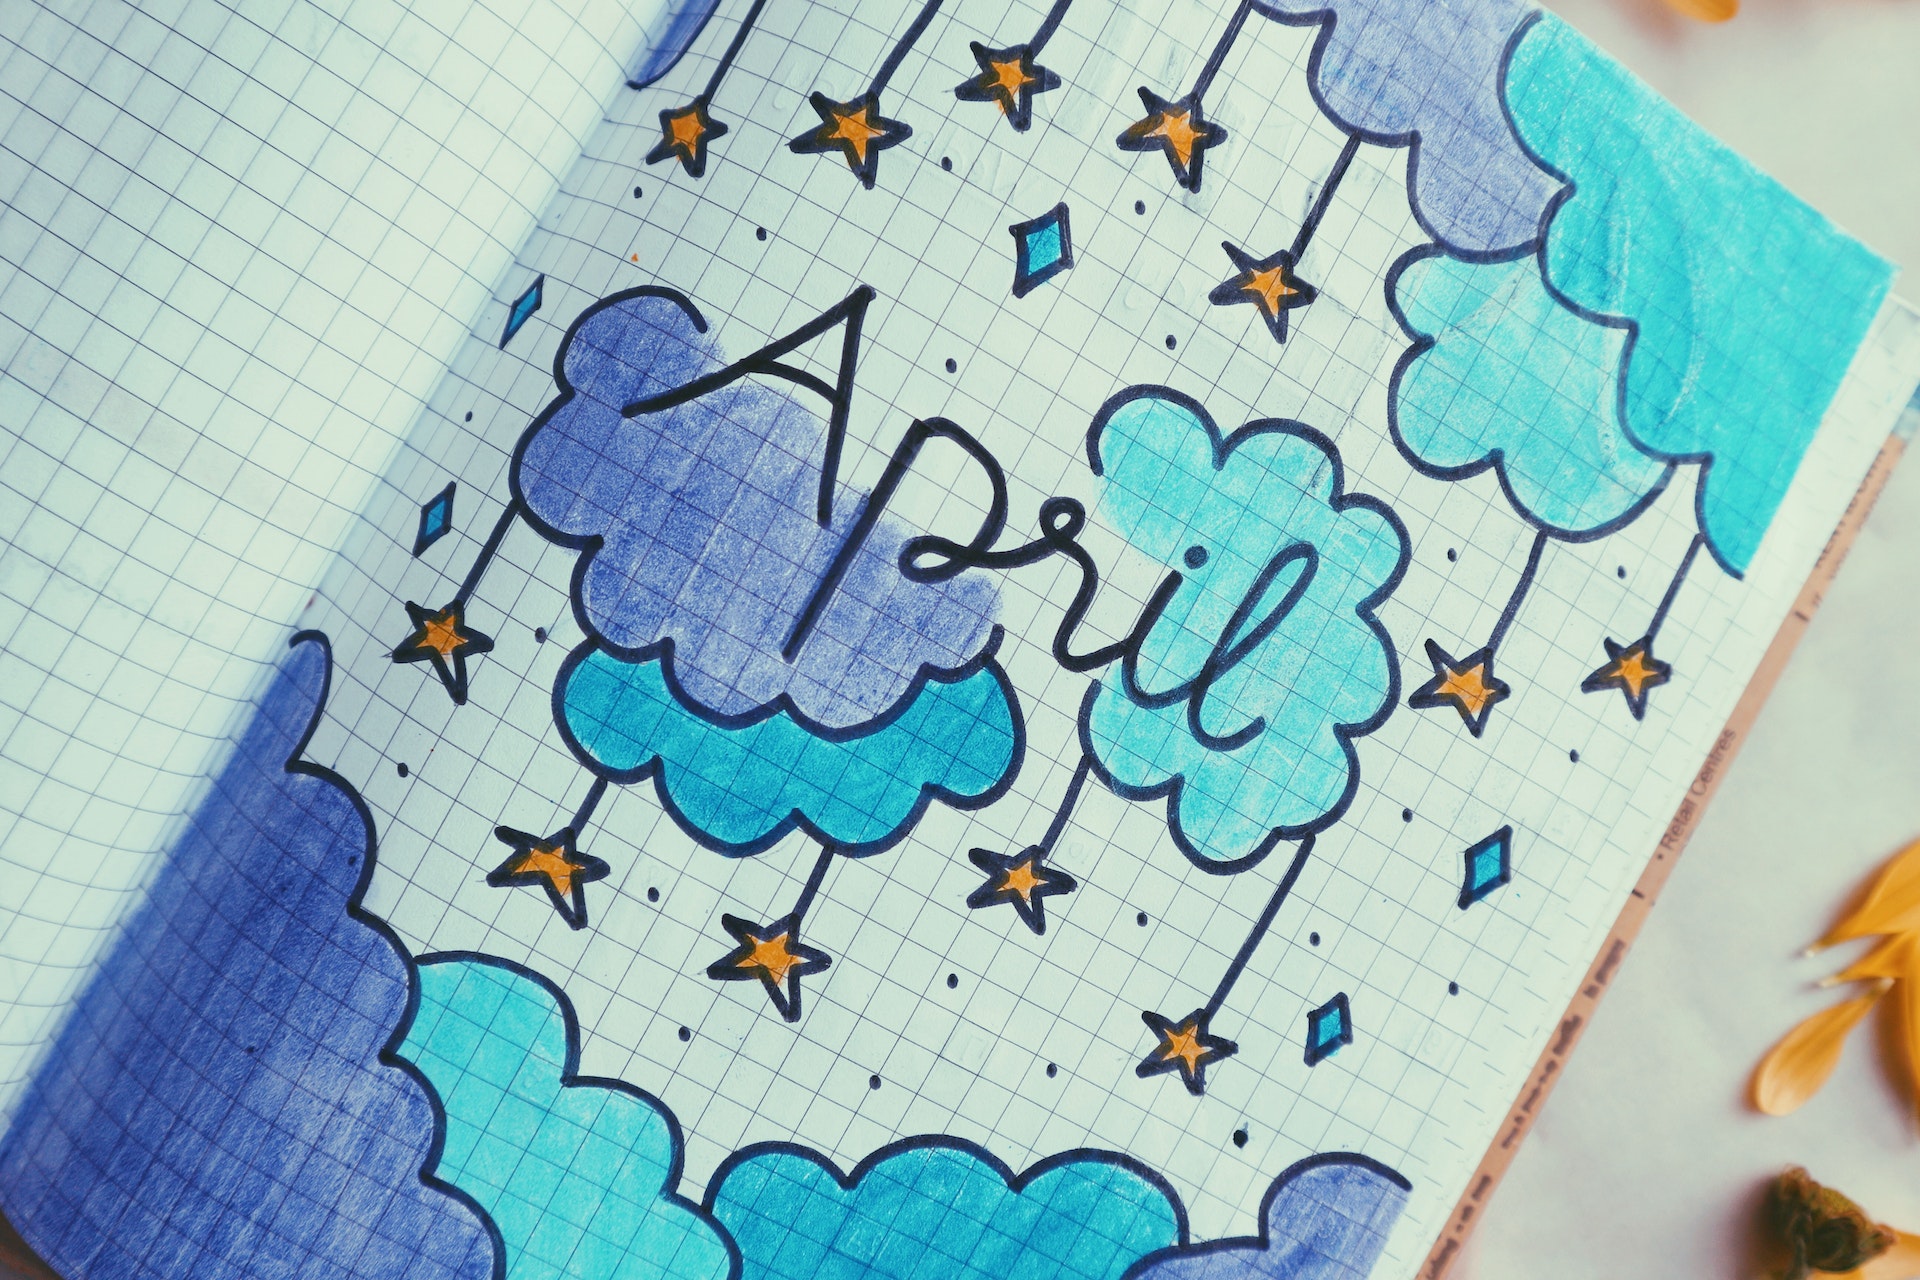 A notebook with the word April written on it